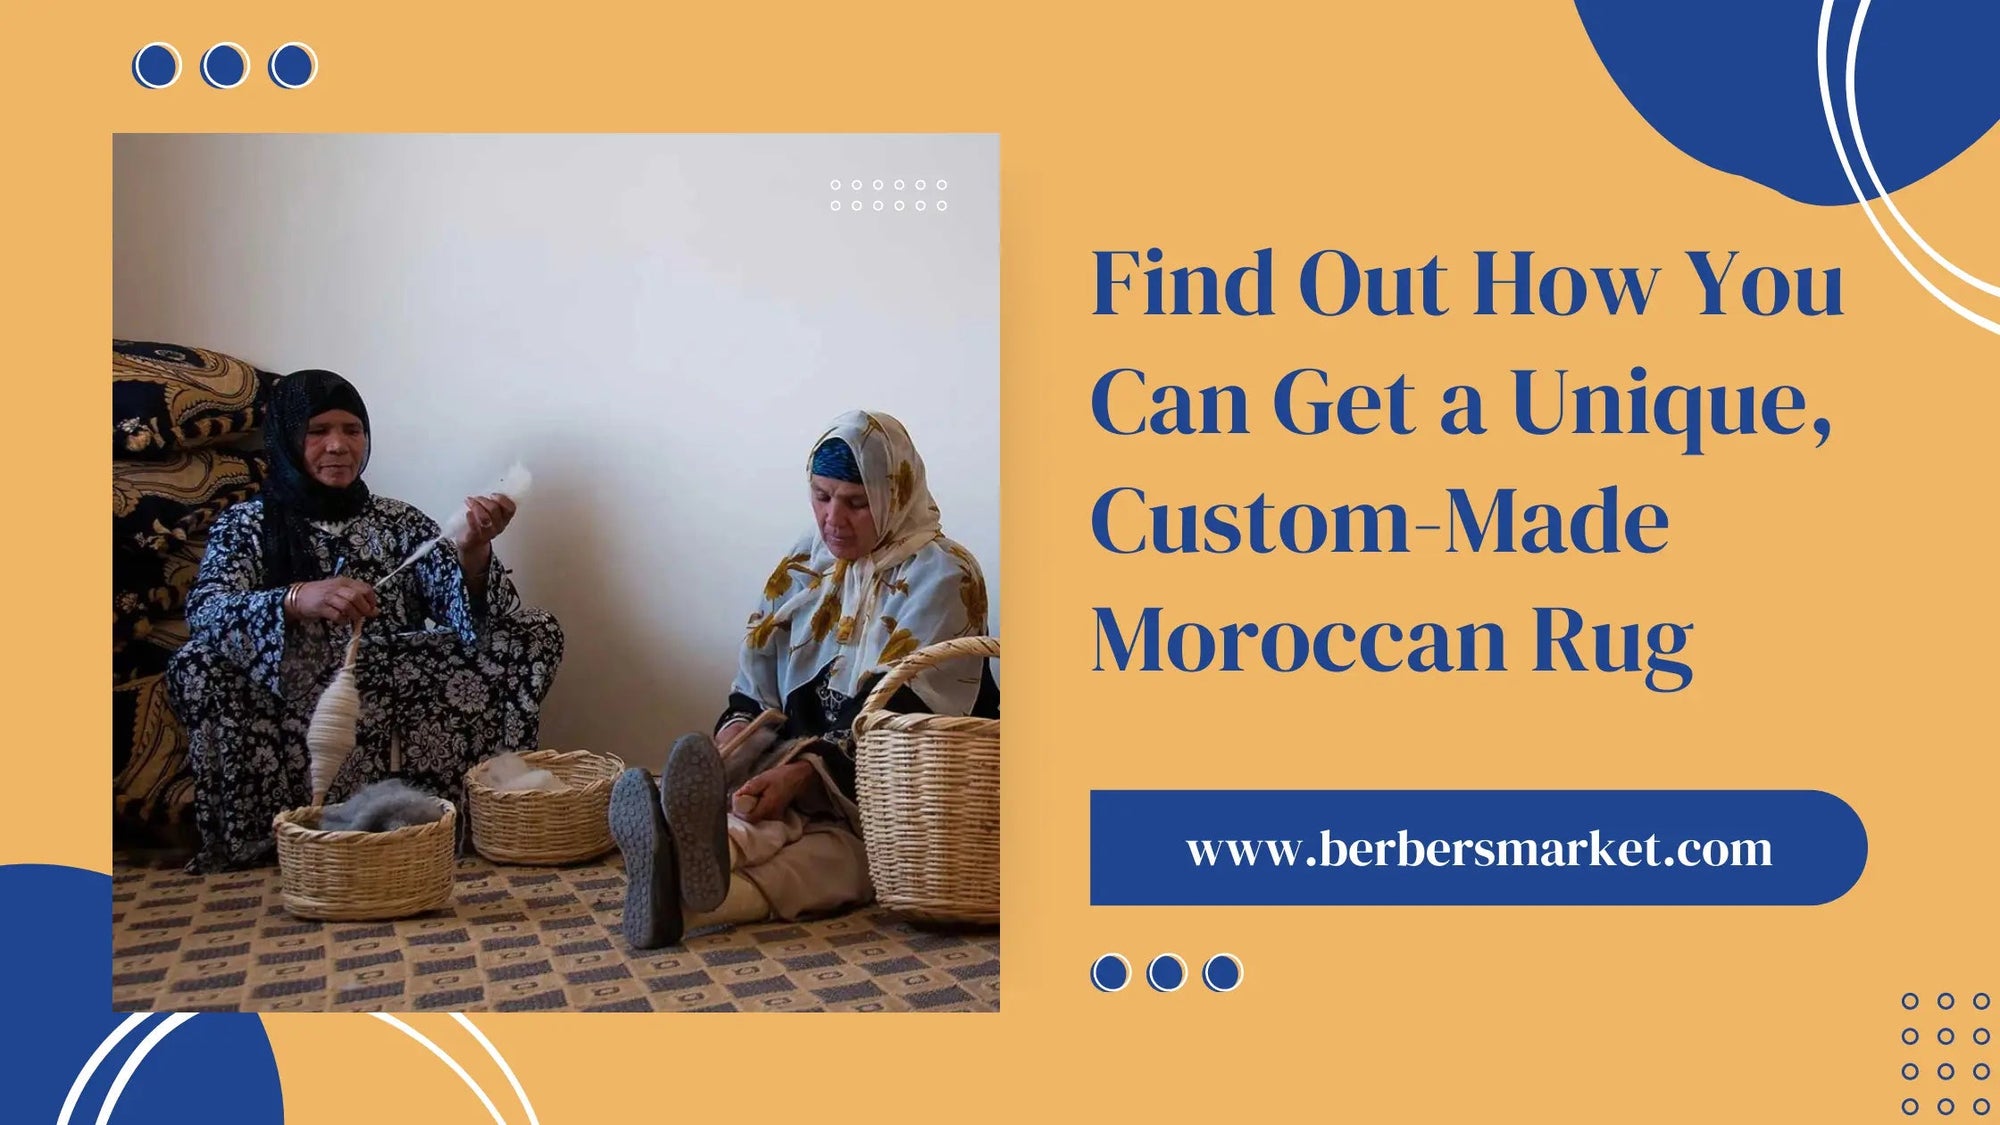 Find Out How You Can Get a Unique, Custom-Made Moroccan Rug - Berbers Market